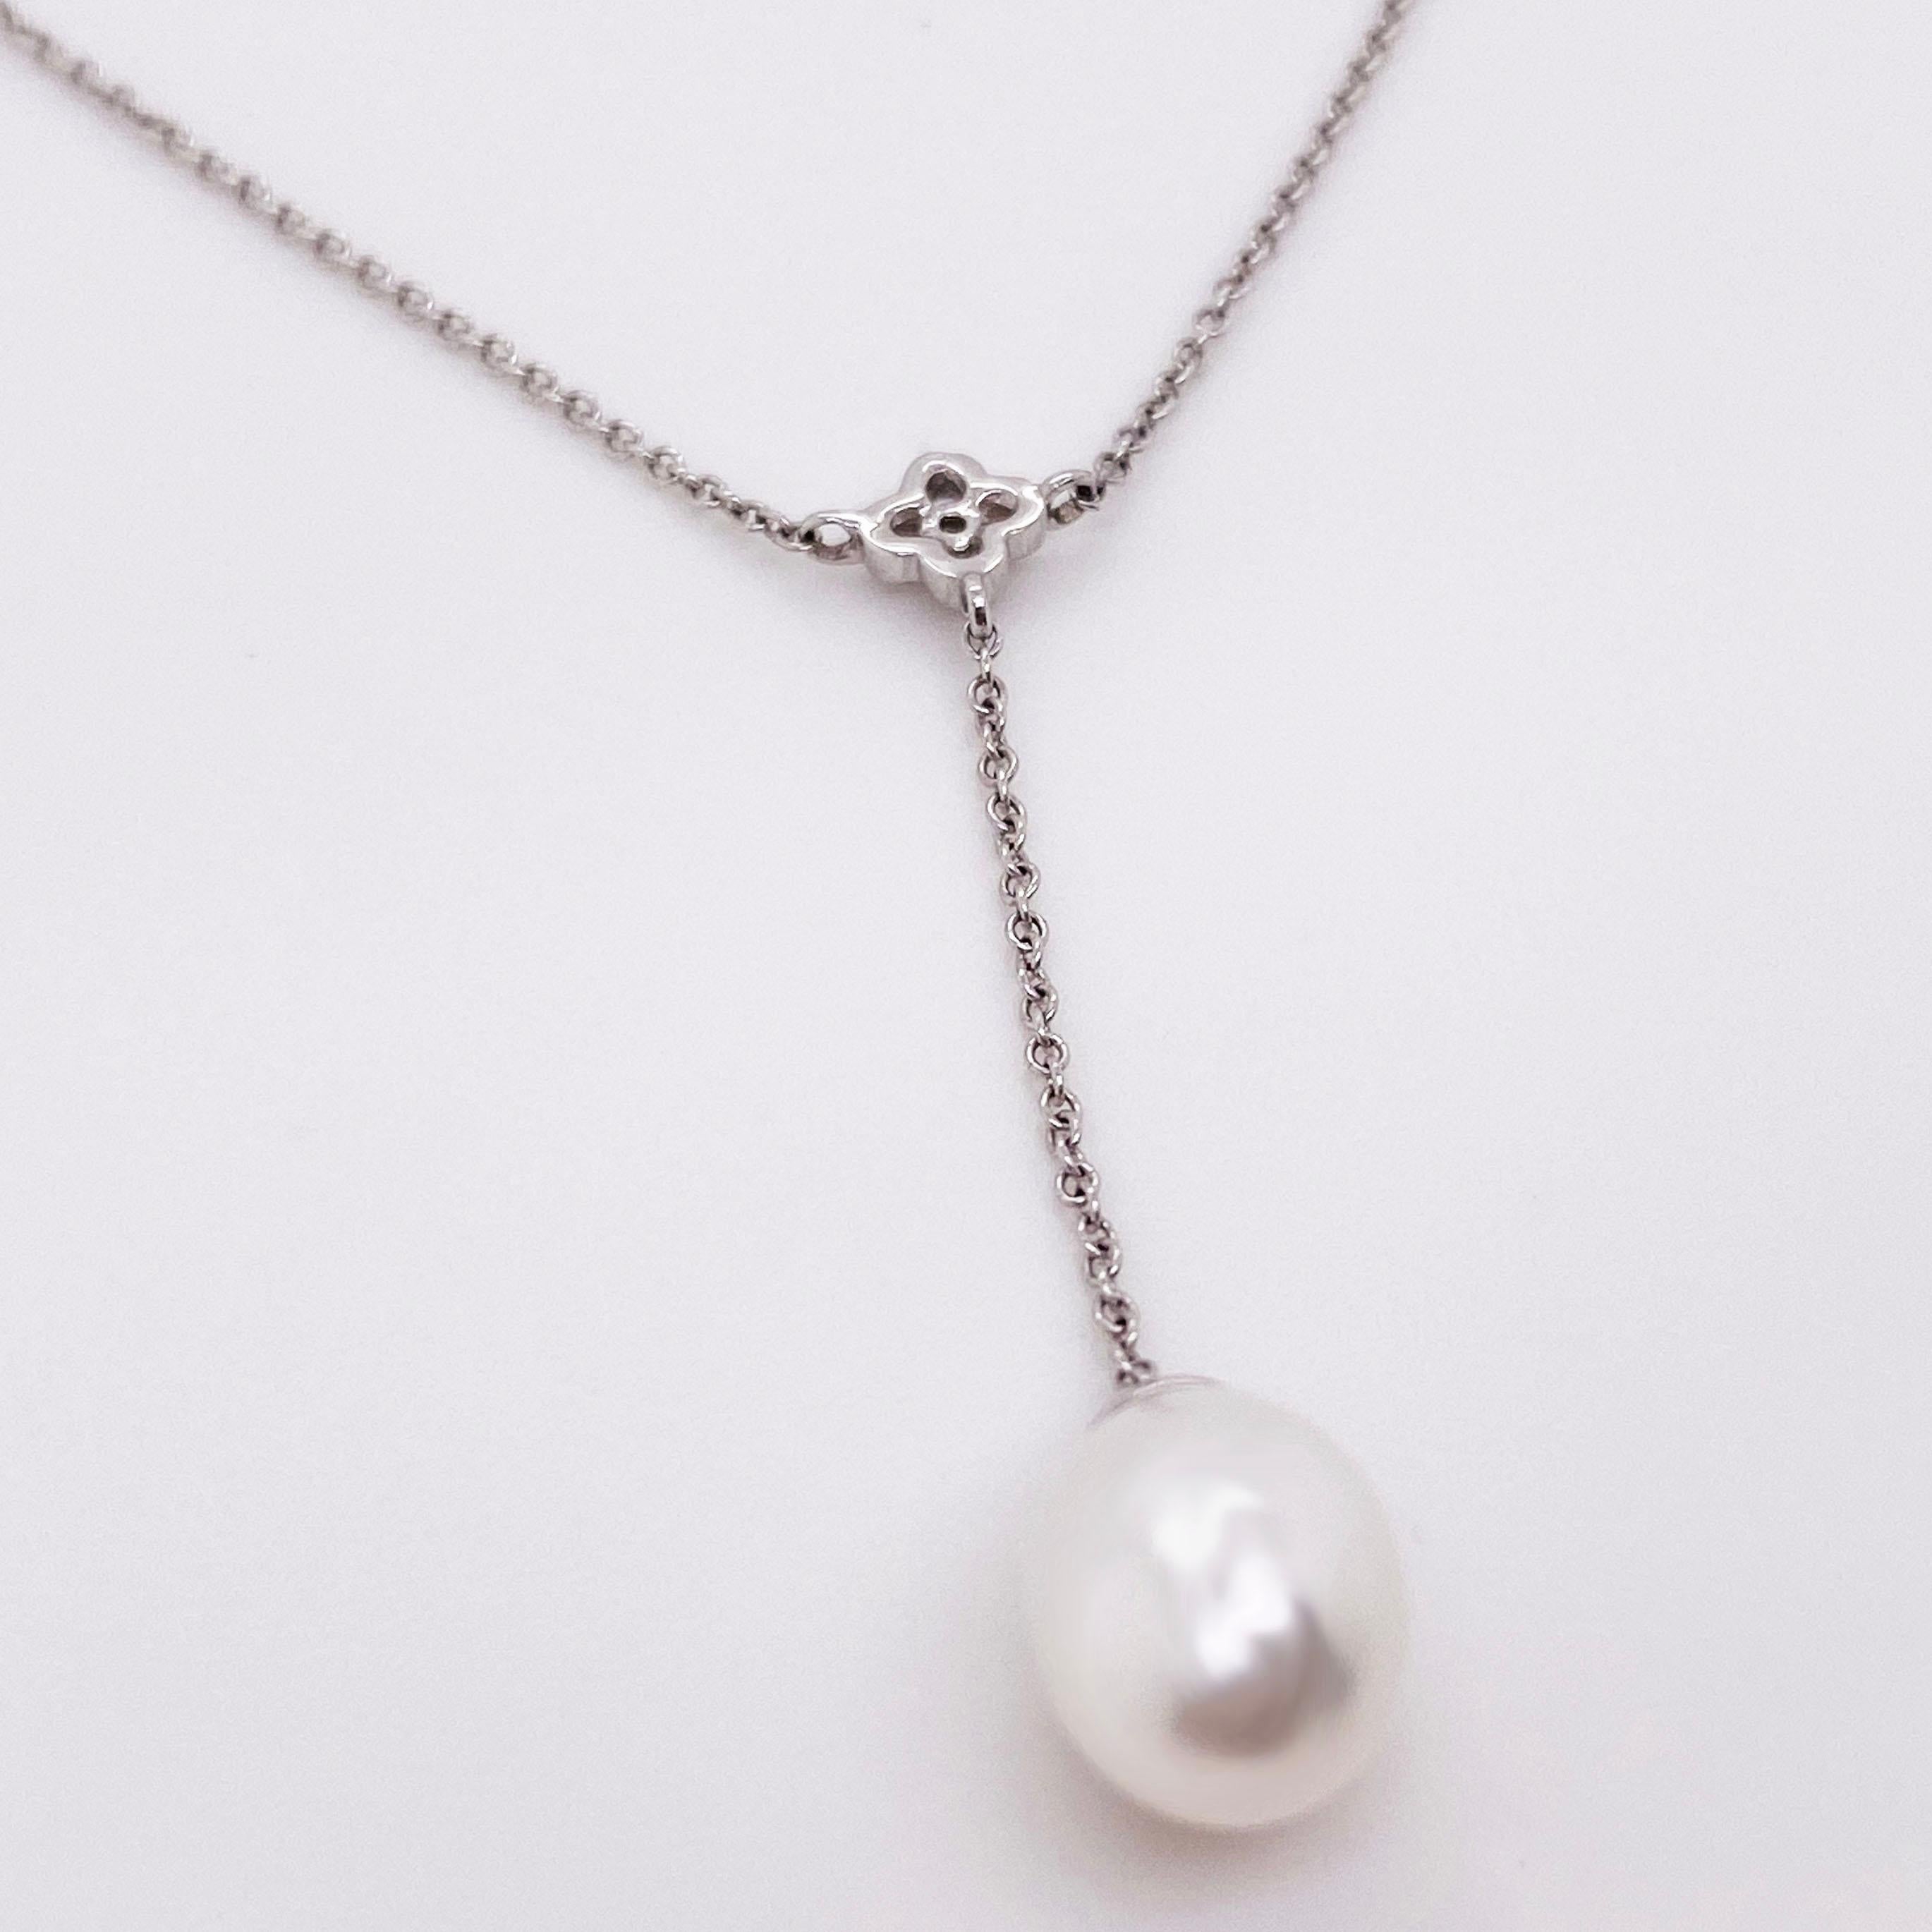 This stunning, elegant piece has a clean design with an oval, genuine freshwater pearl hanging down a lariat necklace. The necklace has a round brilliant diamond set where the chains connect in the center. The diamond is set in a decorative,